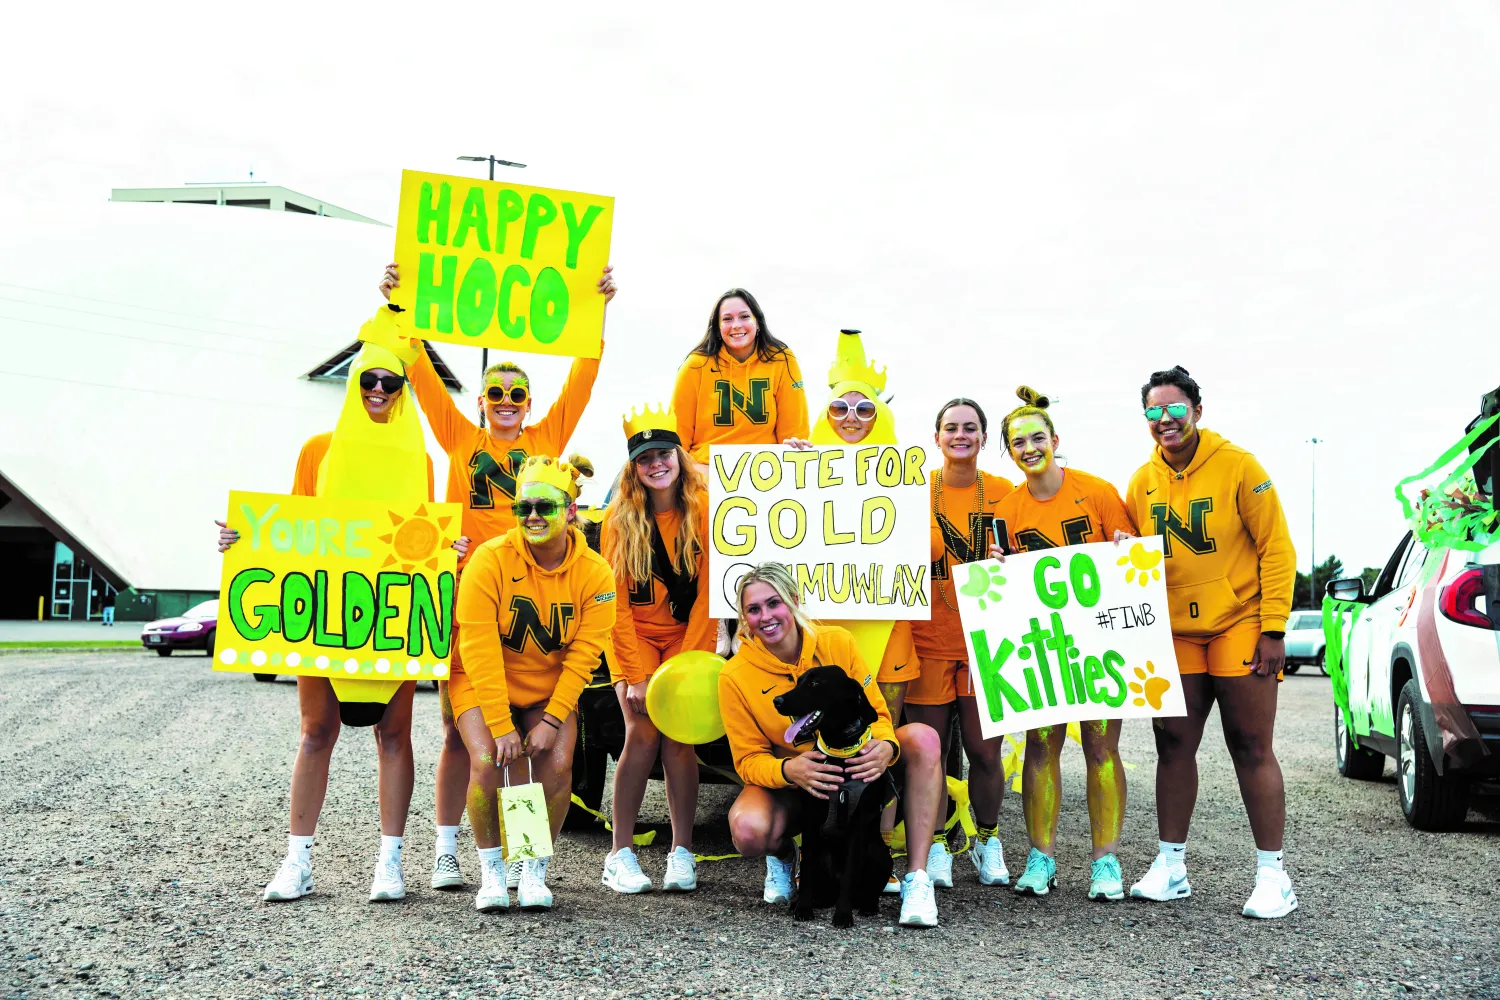 The NMU Women's Lacrosse team at the Homecoming parade